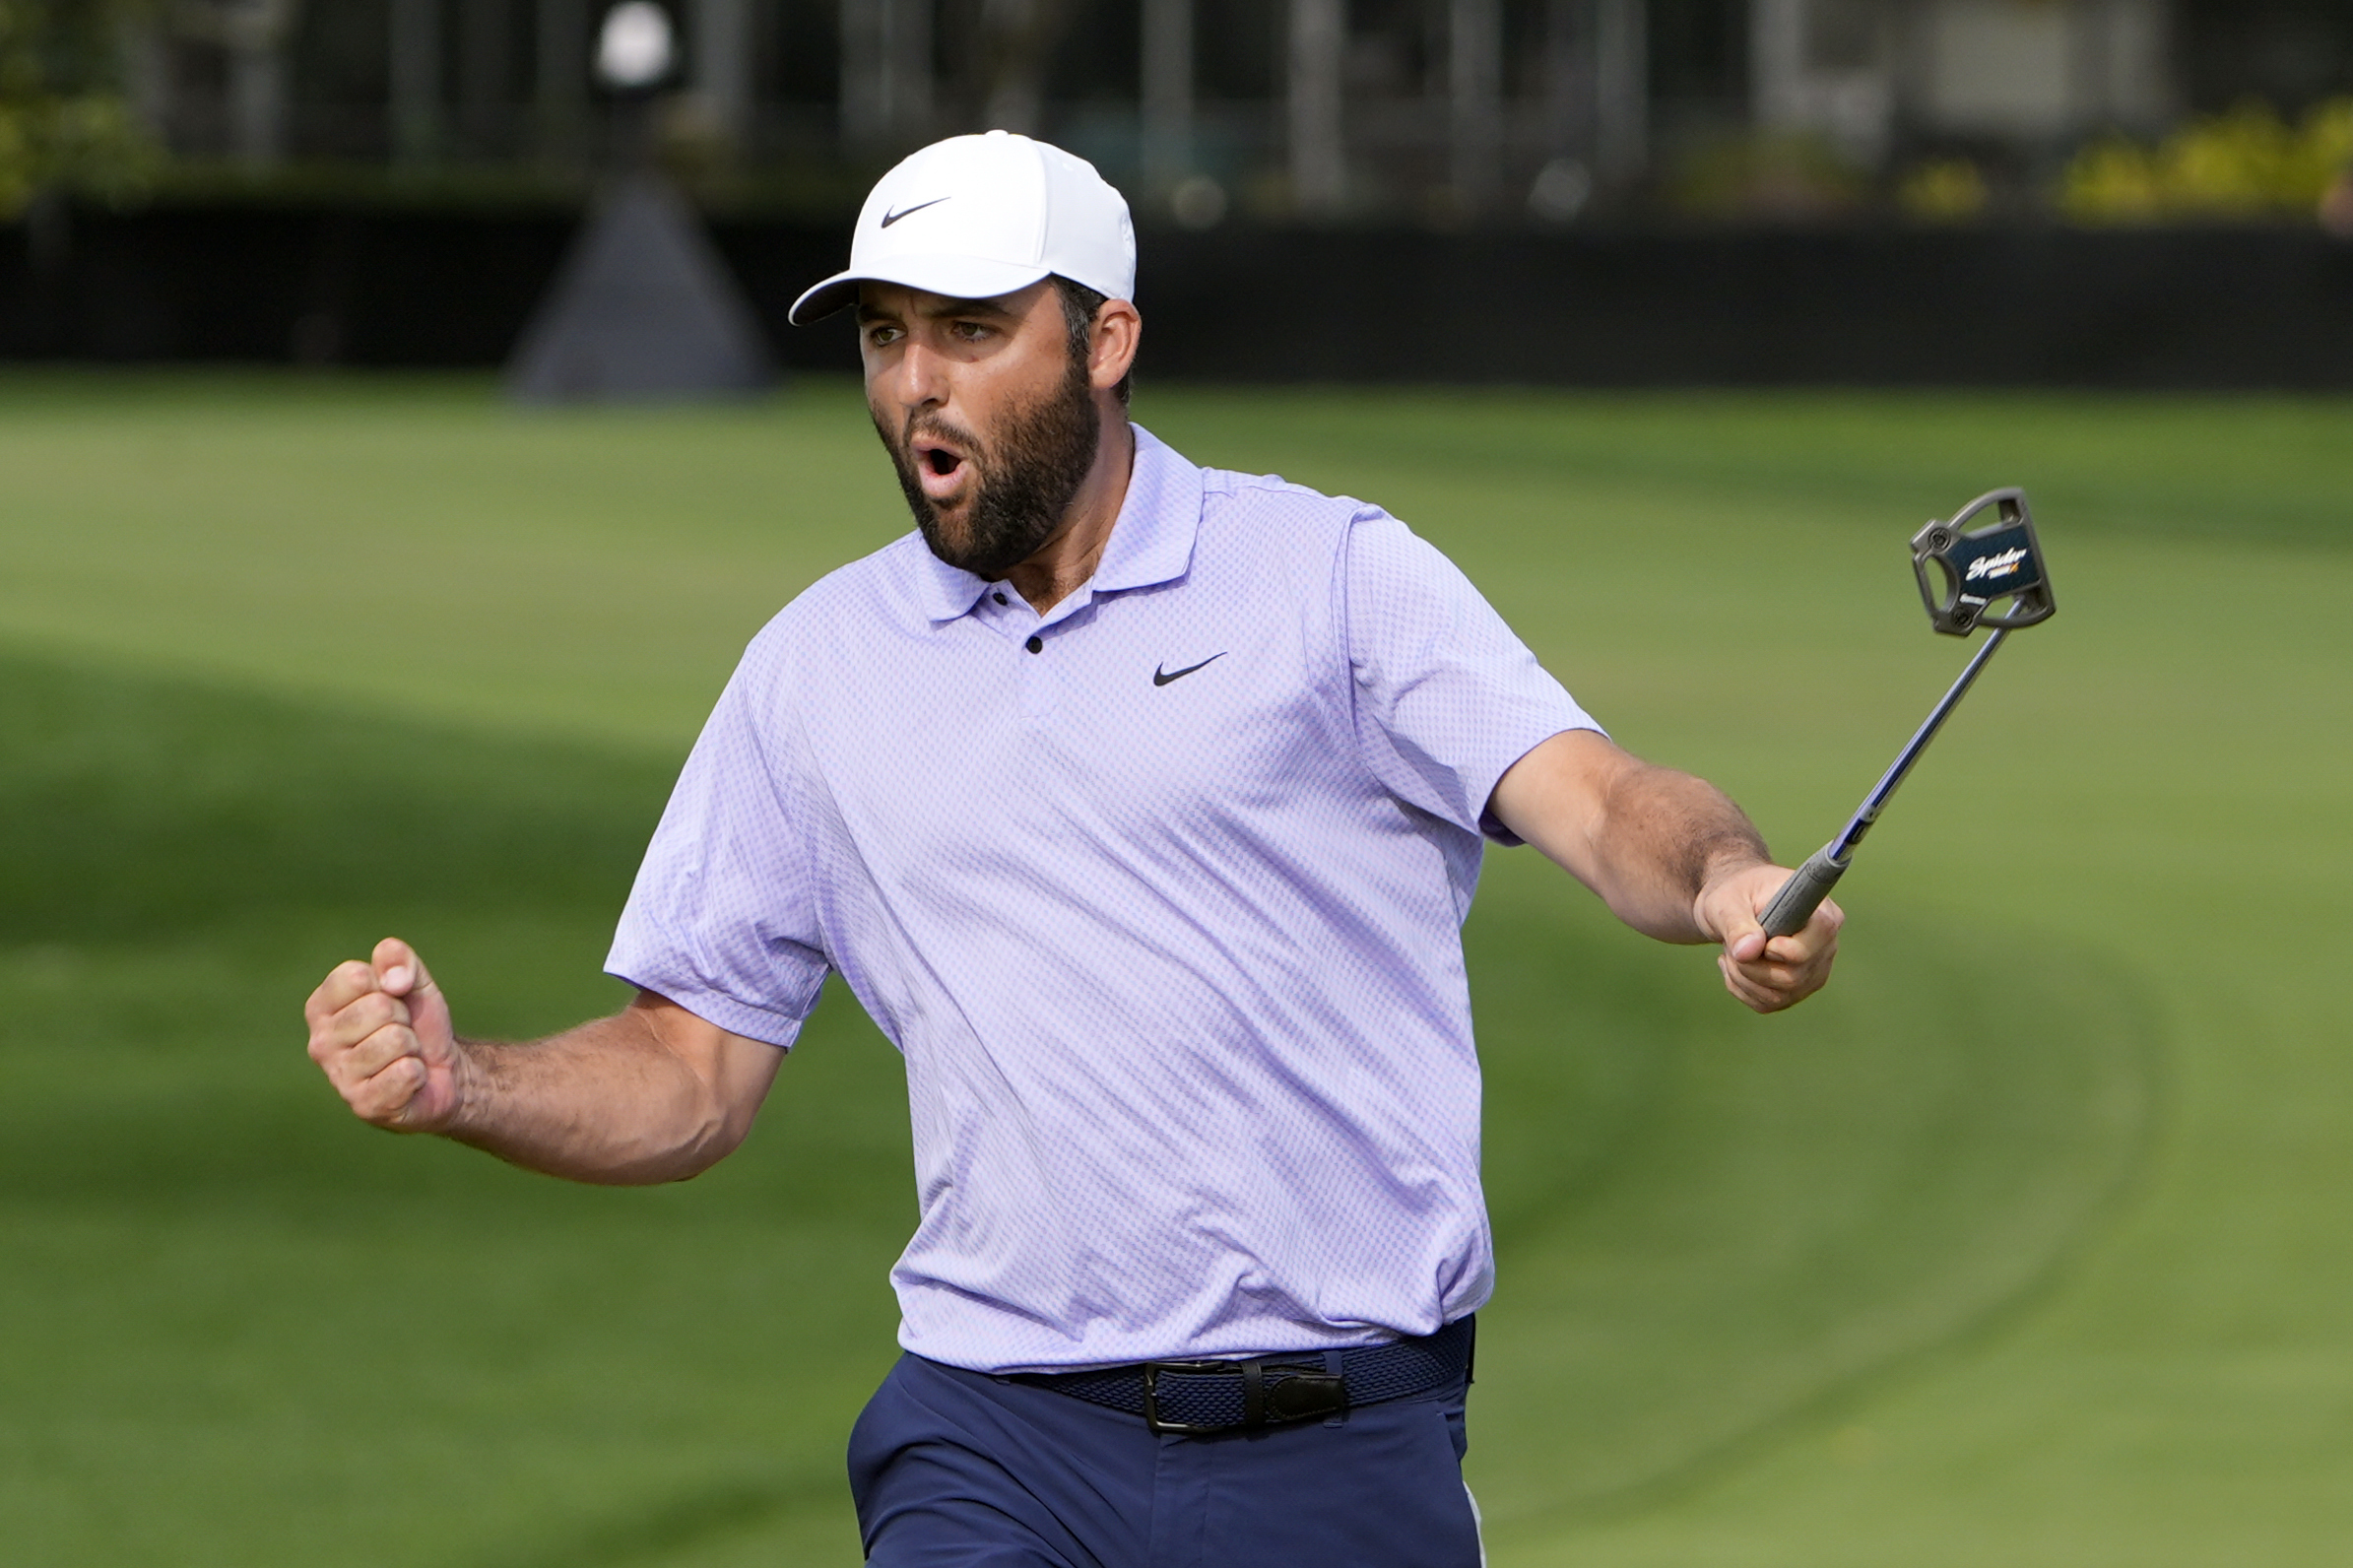 Scottie Scheffler celebrates after a 35-foot birdie putt on the 15th green during the final round of the Arnold Palmer Invitational March 10 at Bay Hill Club and Lodge in Orlando. (AP Photo/John Raoux)